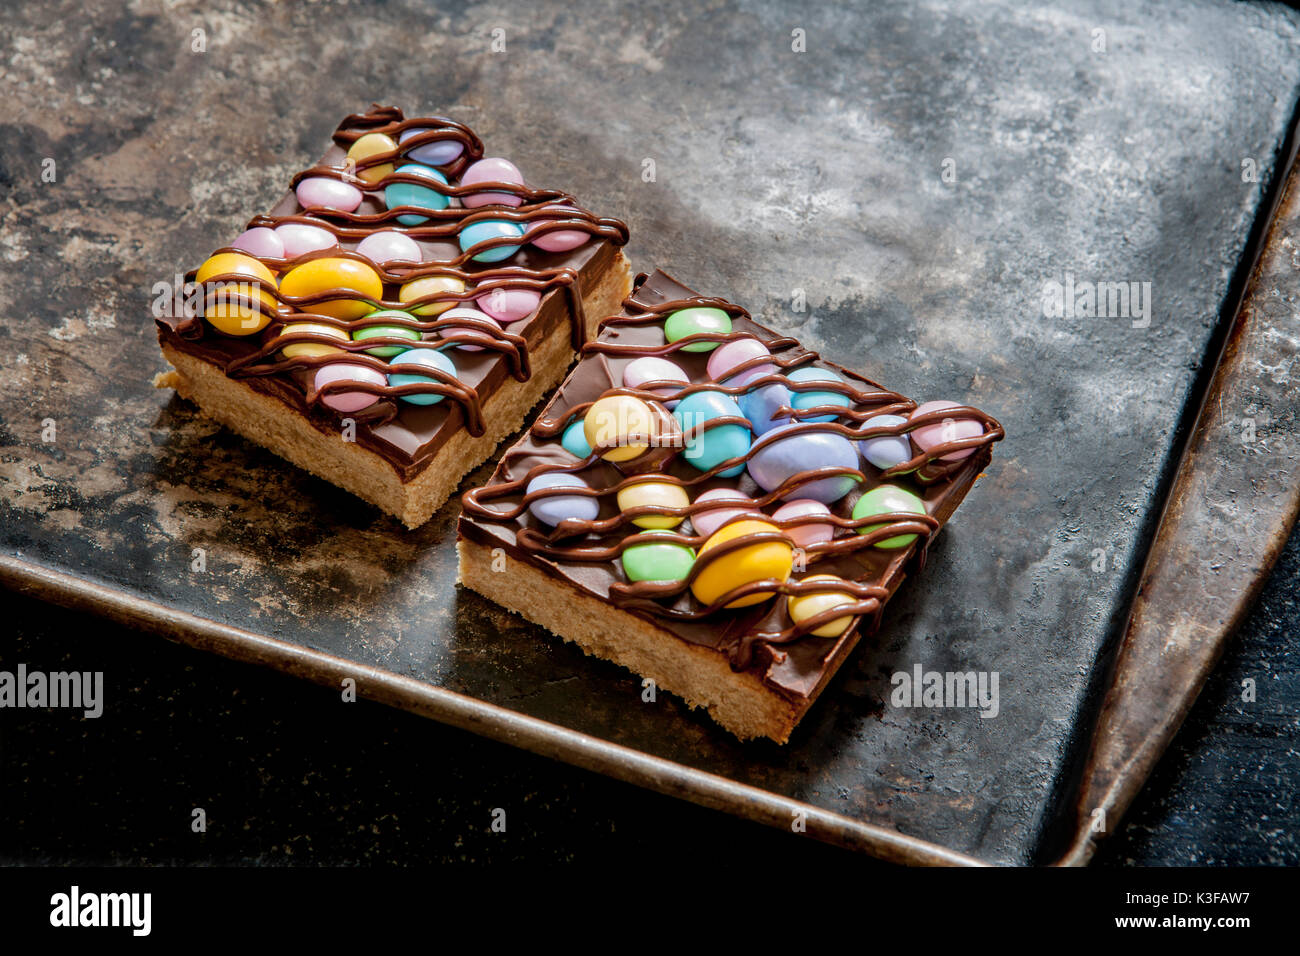 Colorful Shortbread Candy Bars Drizzled with Chocolate on Baking Sheet Stock Photo